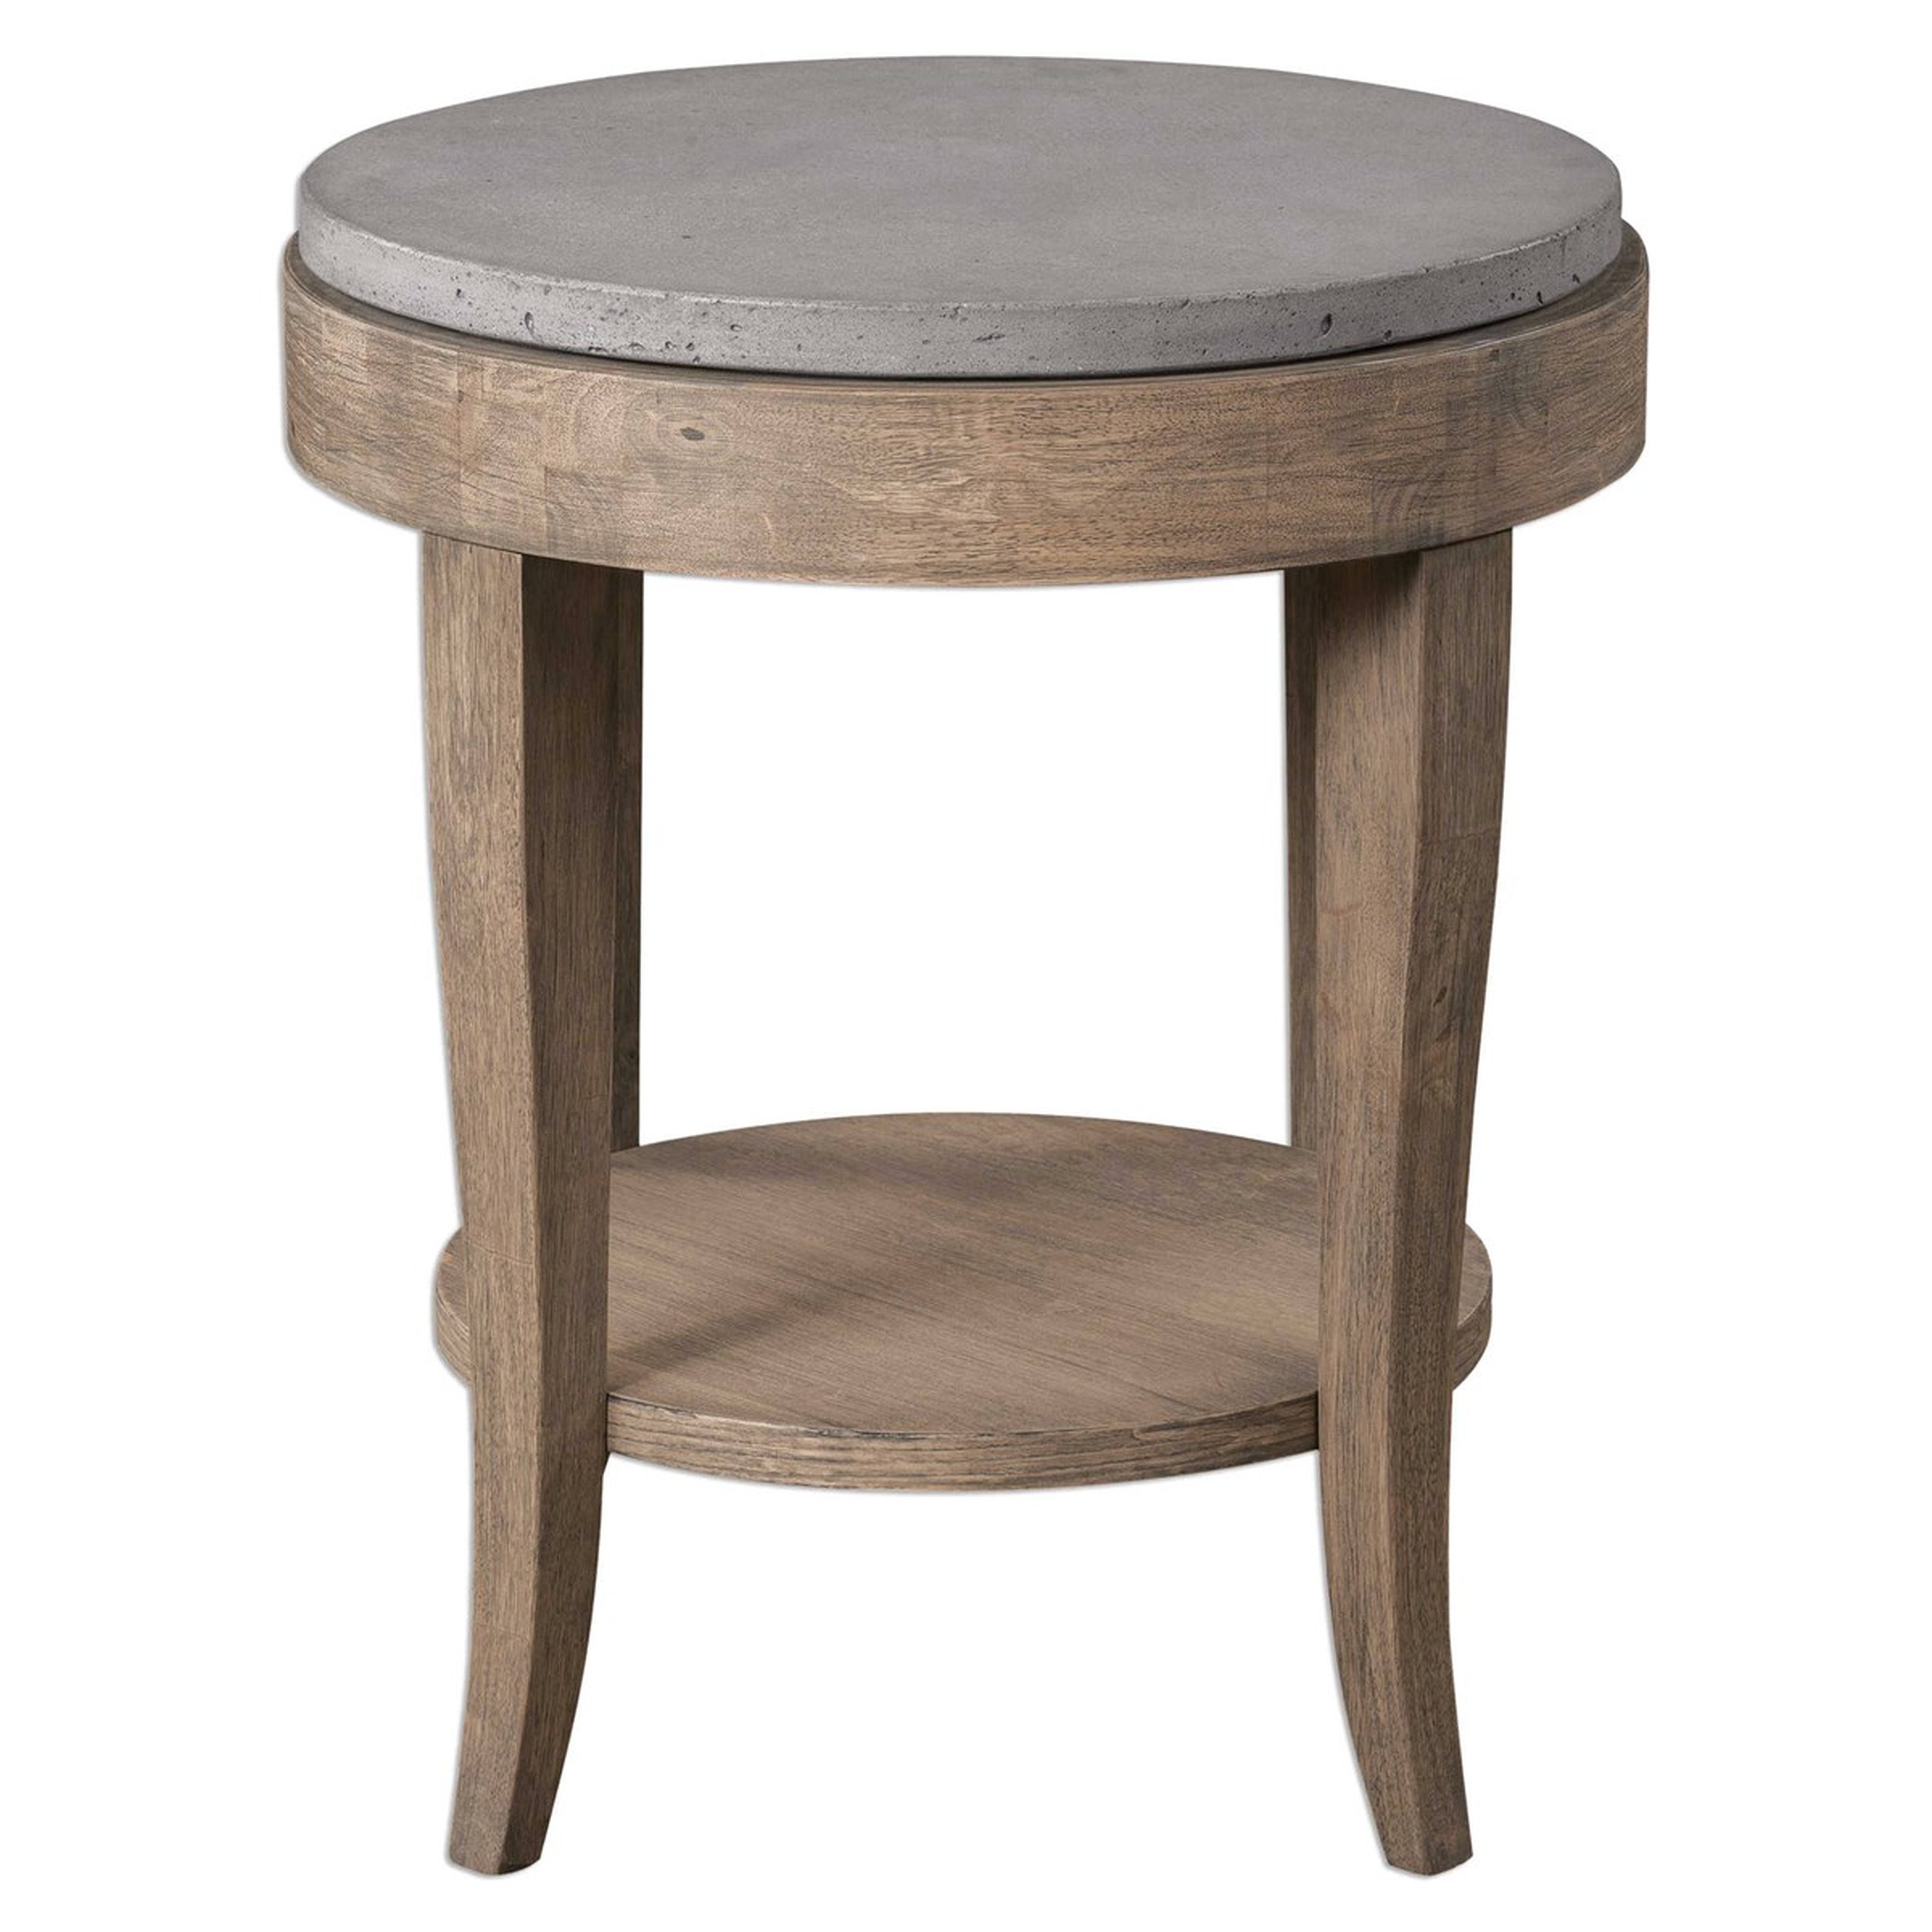 Deka Round Accent Table - Hudsonhill Foundry